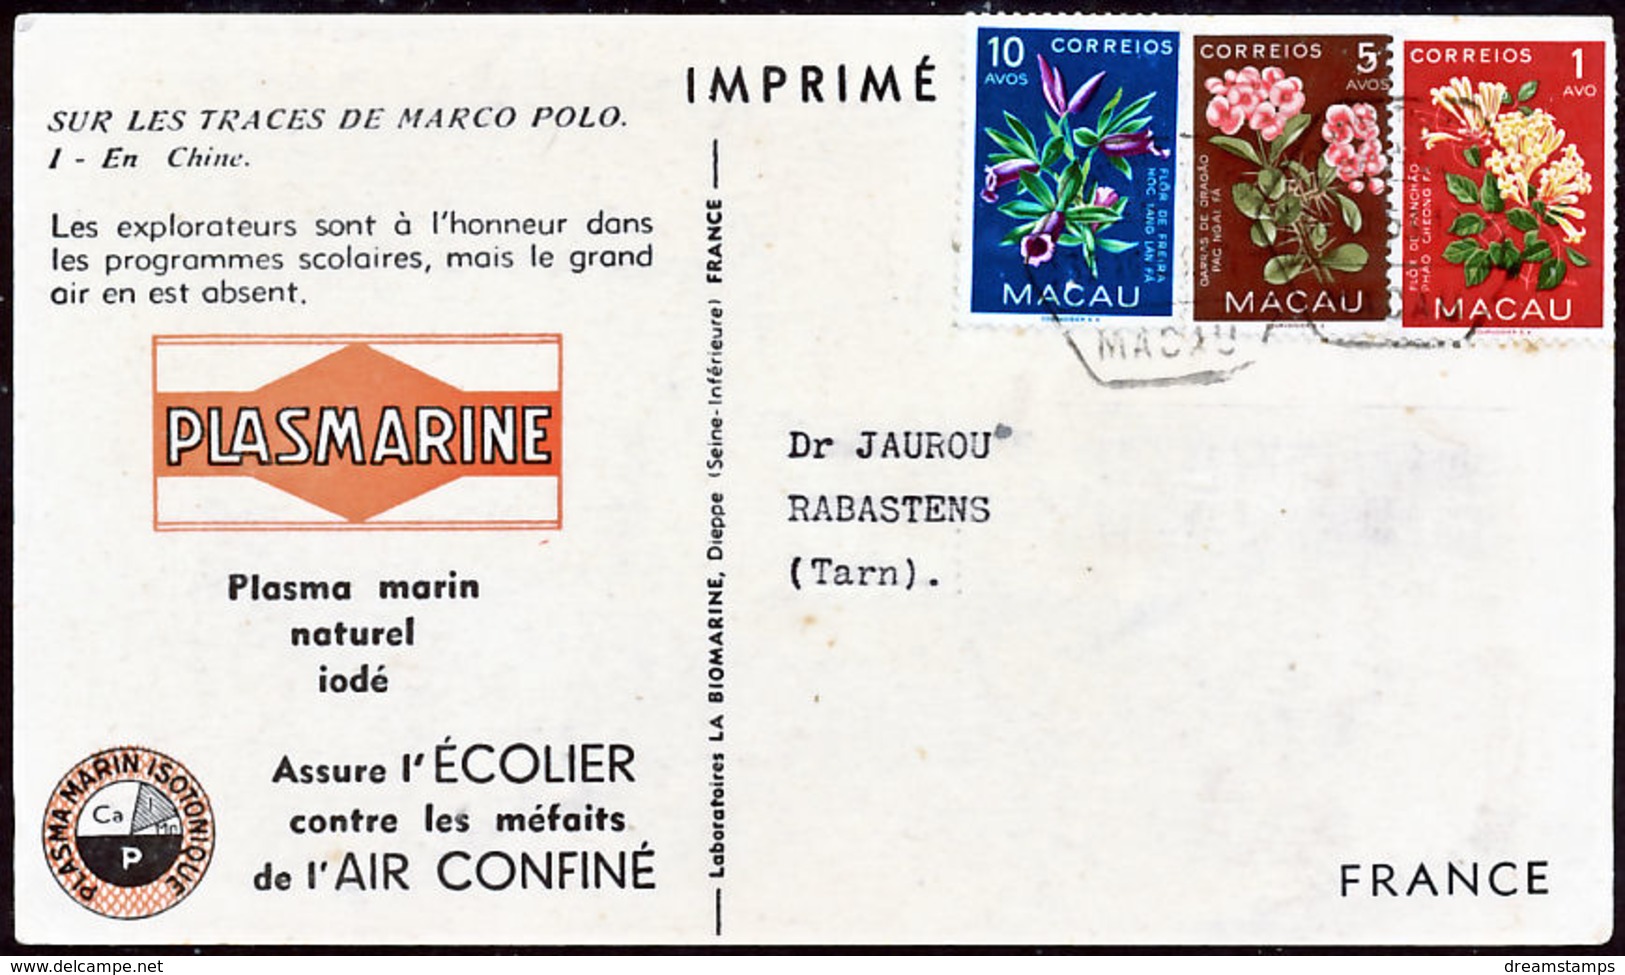 !										■■■■■ds■■ Macao 1953 Advertising Cover Rate 16 Avos To France Marco Polo Anf The Grand Khan (CO372) - Briefe U. Dokumente